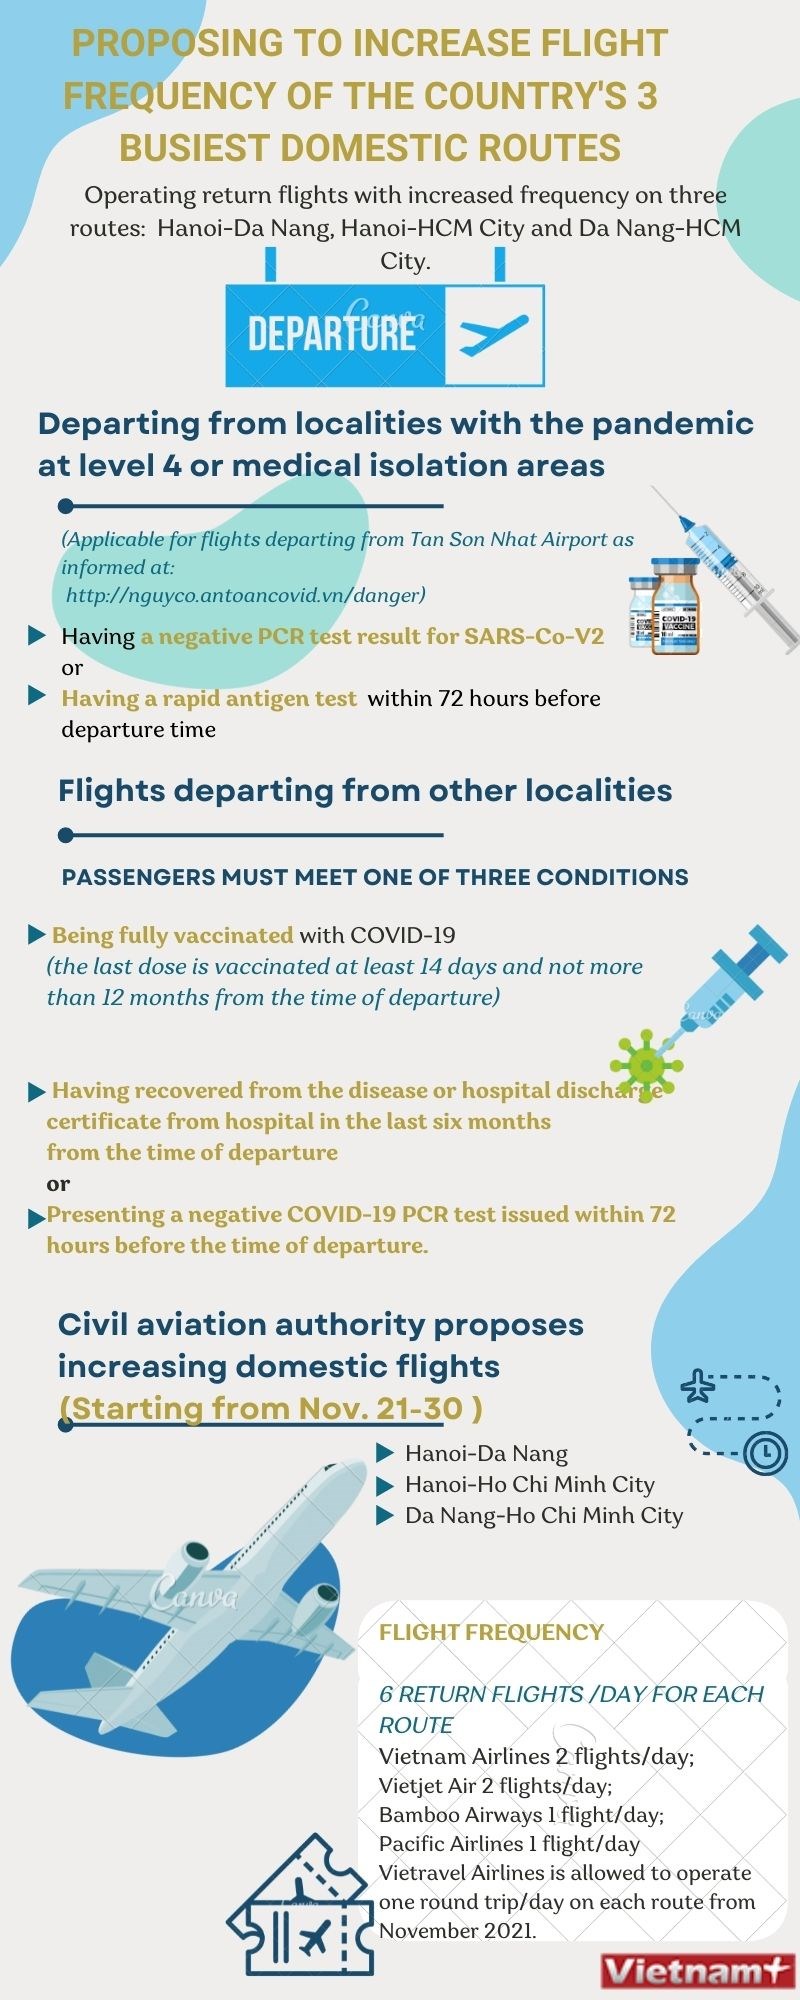 Proposing to increase flight frequency of the country's 3 busiest domestic routes hinh anh 1